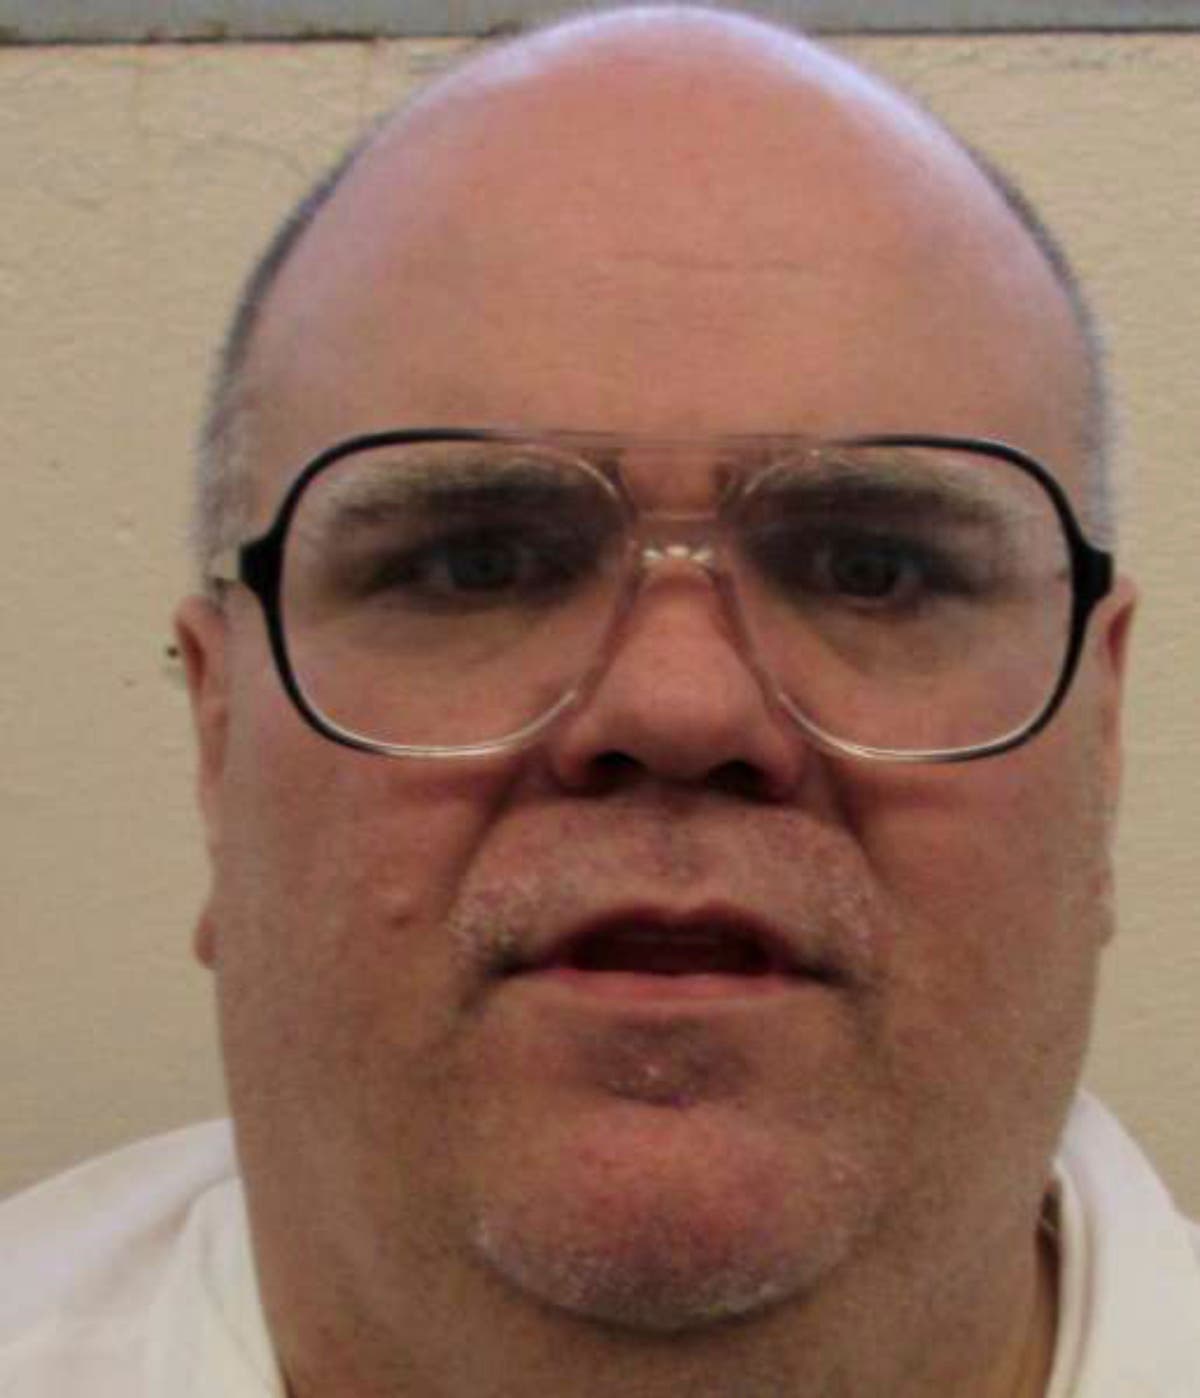 Alabama schedules second nitrogen gas execution for man who survived lethal injection